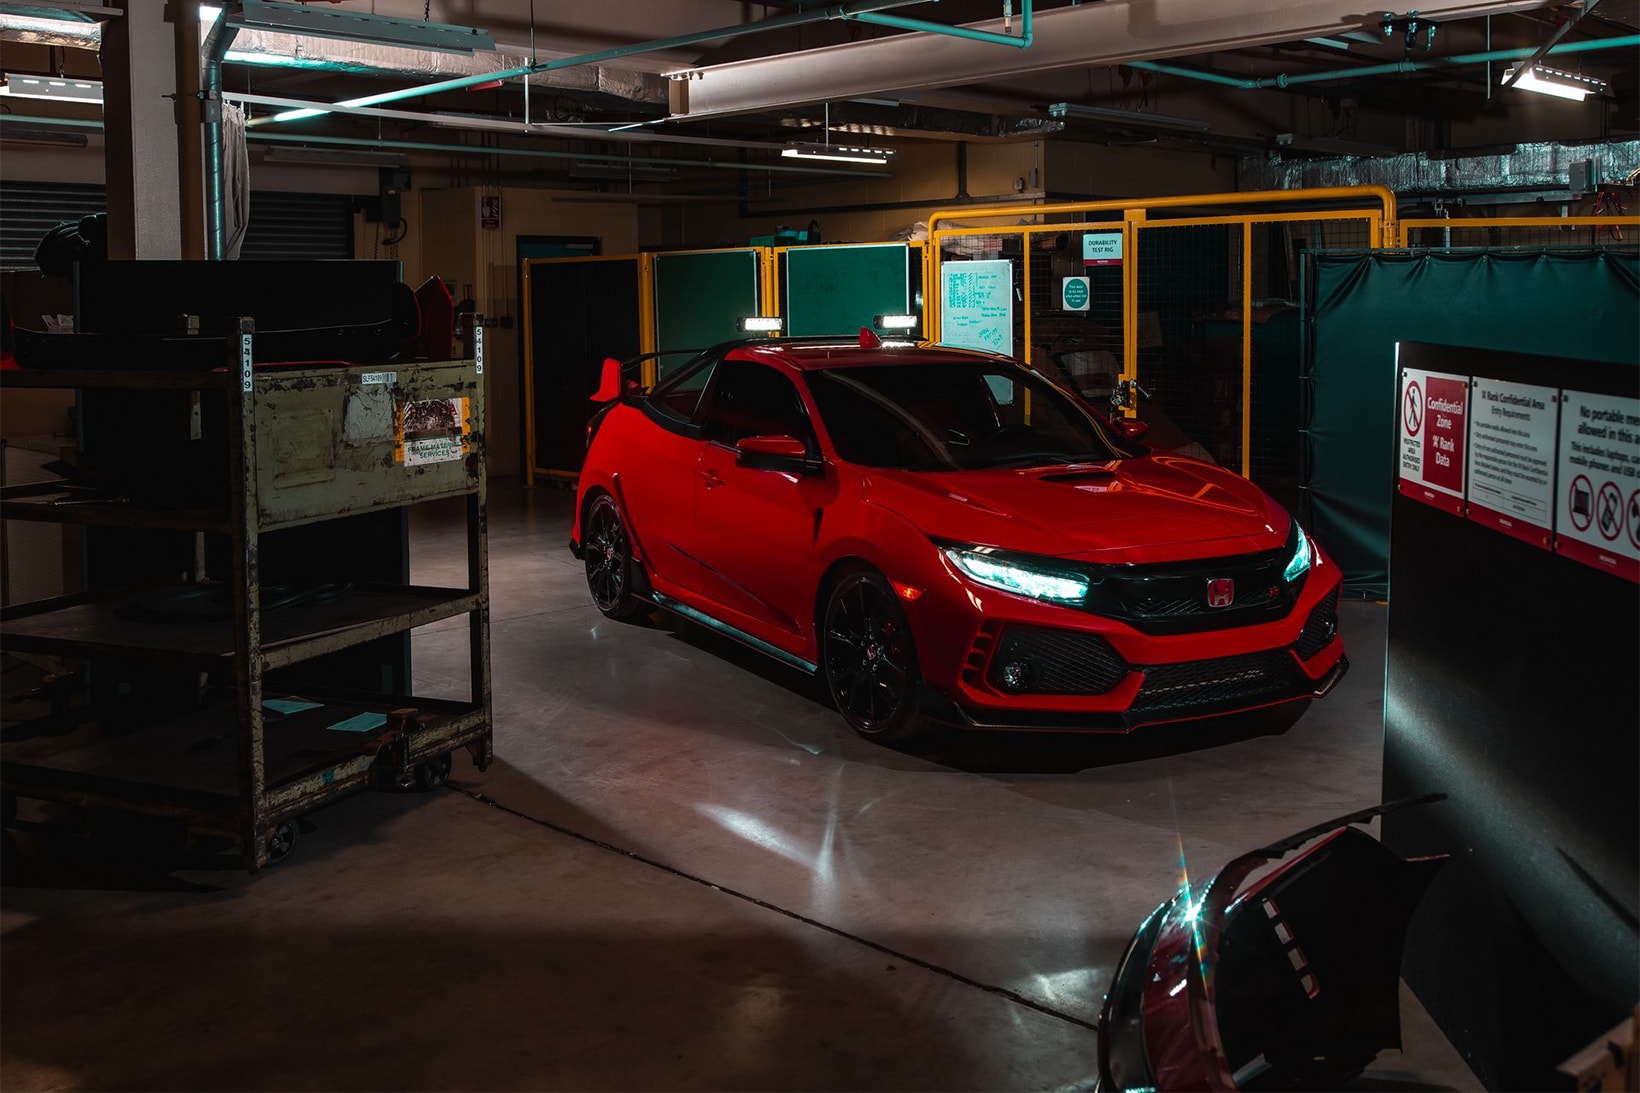 Honda Civic Type R Pickup Truck Concept SMMT Test Day project p hot hatchback